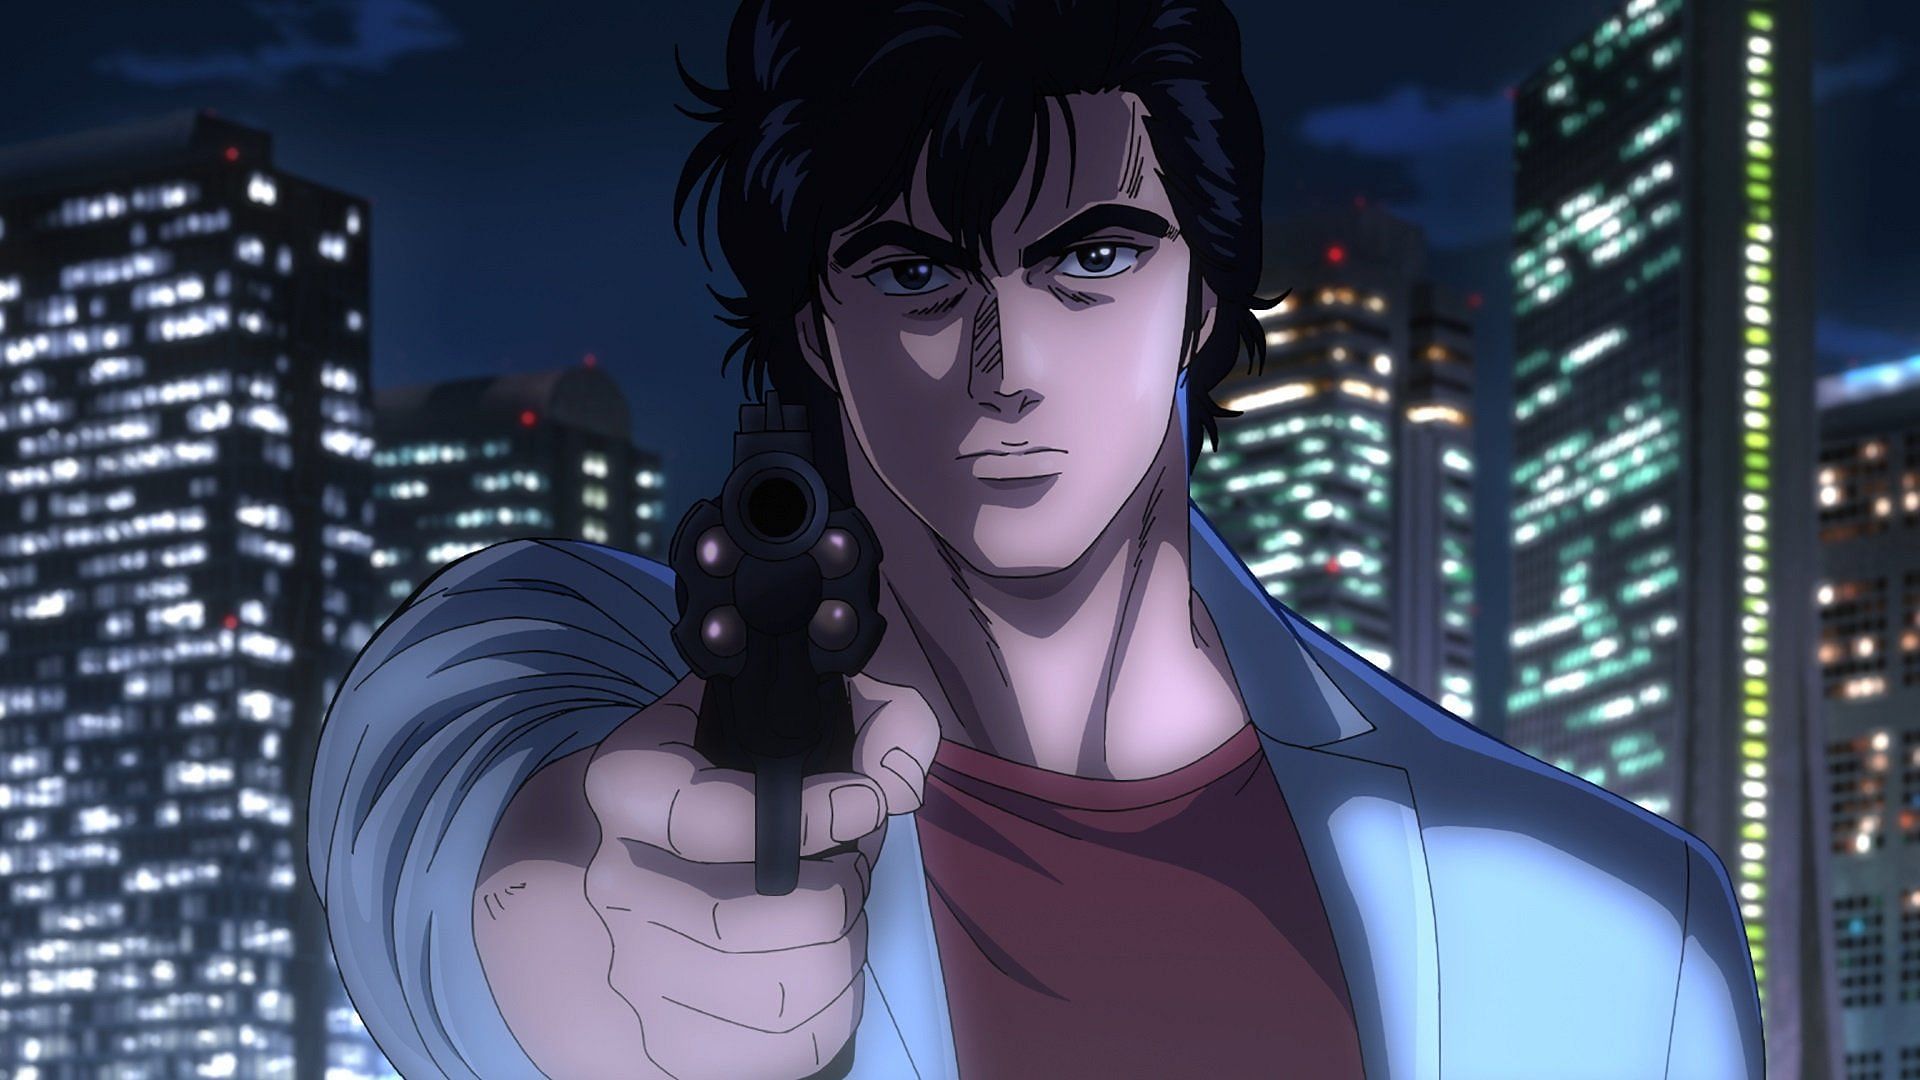 The new City Hunter anime announces release date, theme song, and more (Image via Sunrise Studios, The Answer Studio Co., Ltd.)